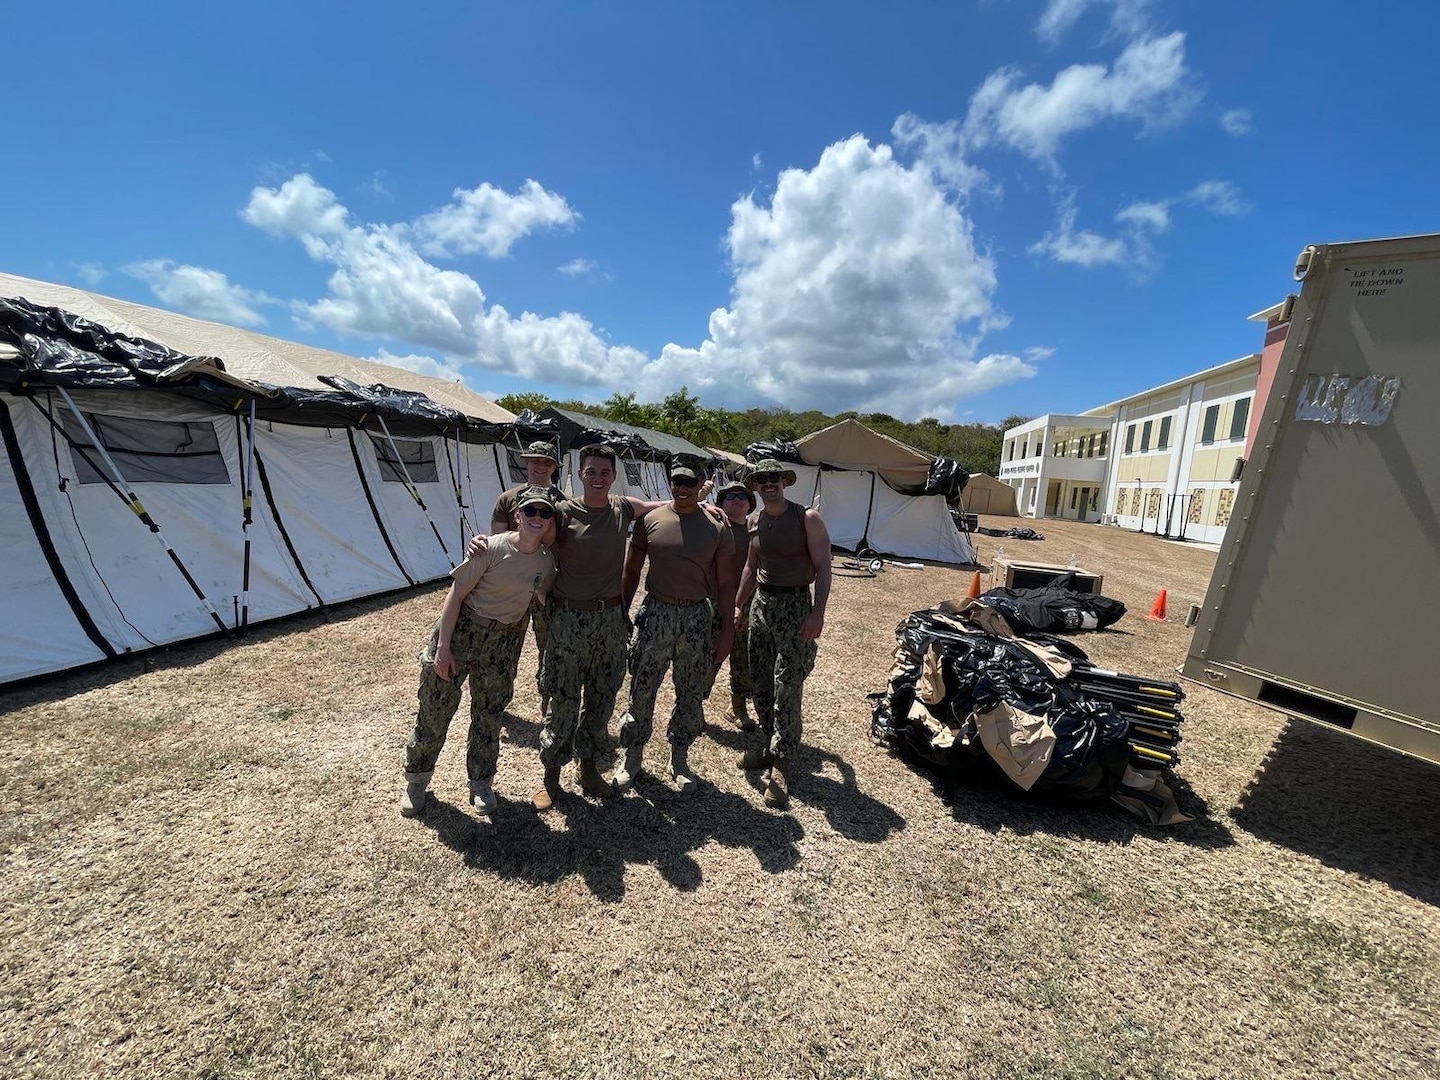 Coast Guard Reserve crews from three Port Security Units (PSU) arrived at the Jose Aponte de la Torre Airport in Ceiba, Puerto Rico to conduct exercise “Poseidon’s Domain” from April 8 through April 25, 2024. Planned since July 2023, the exercise will train crews from PSUs 305, 307 and 309 on Coast Guard Reserve PSU functions in support of national defense and homeland security missions. (U.S. Coast Guard photos)